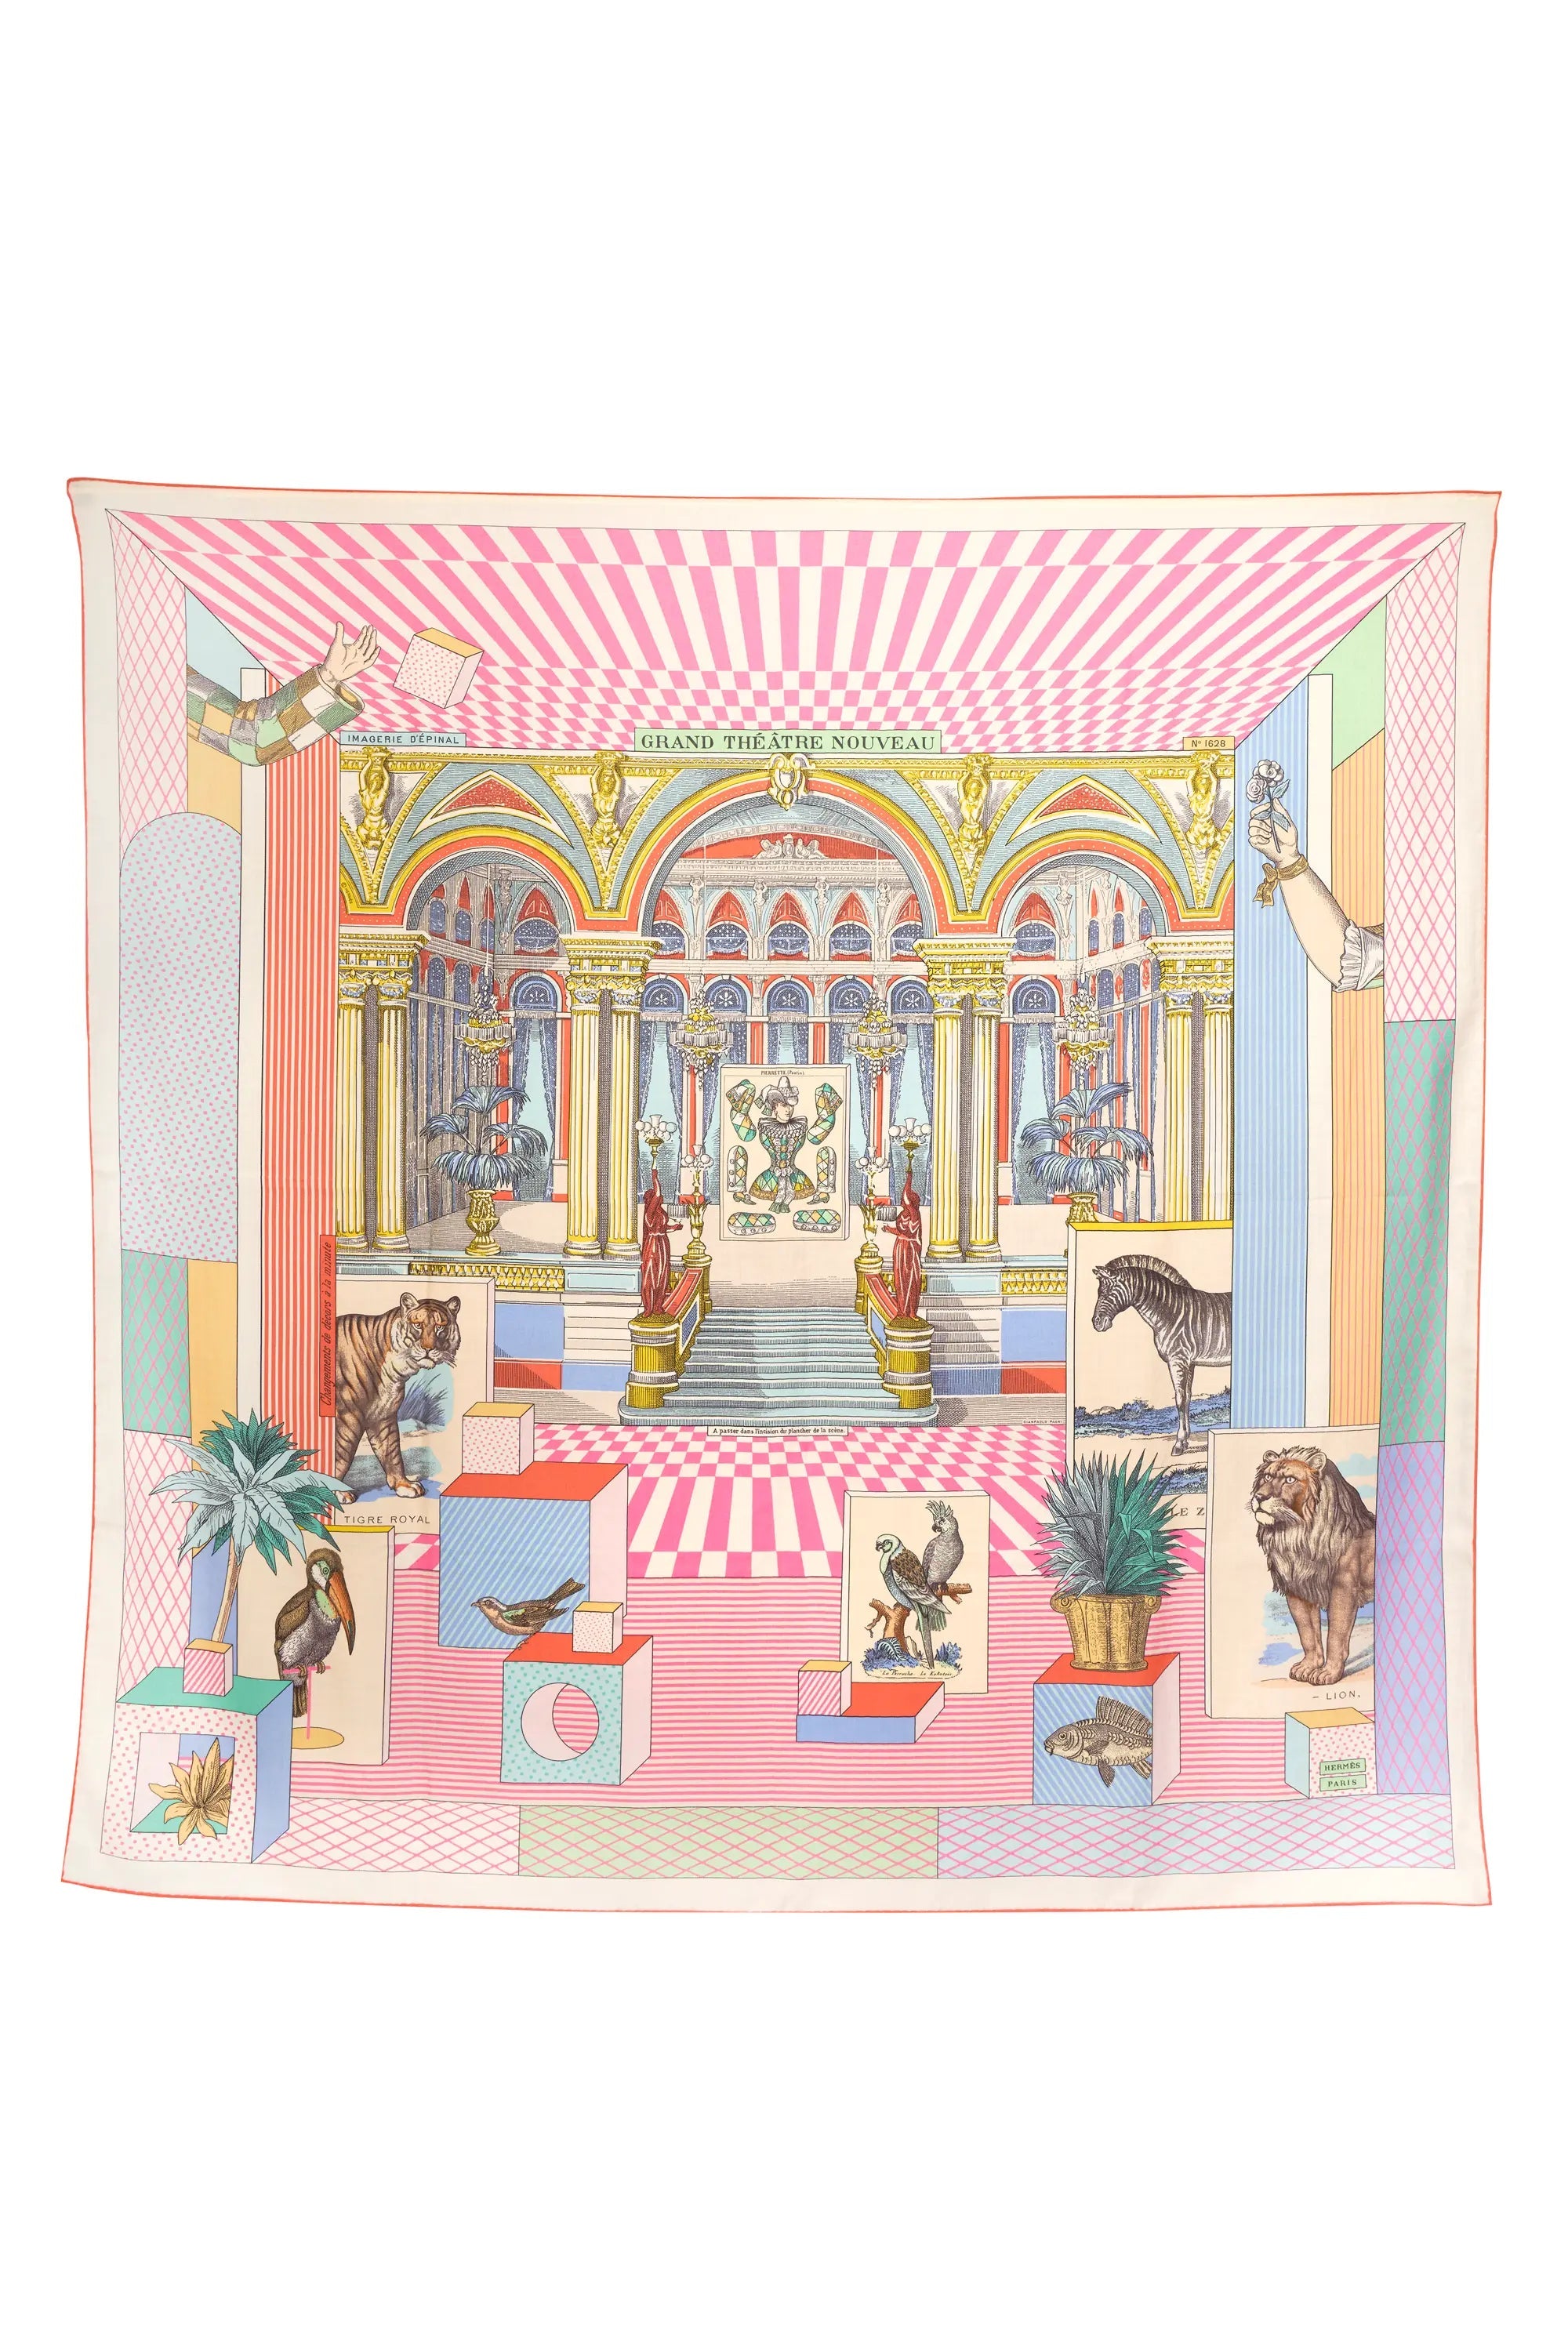 Hermes "Grand Theater" Scarf 110cm